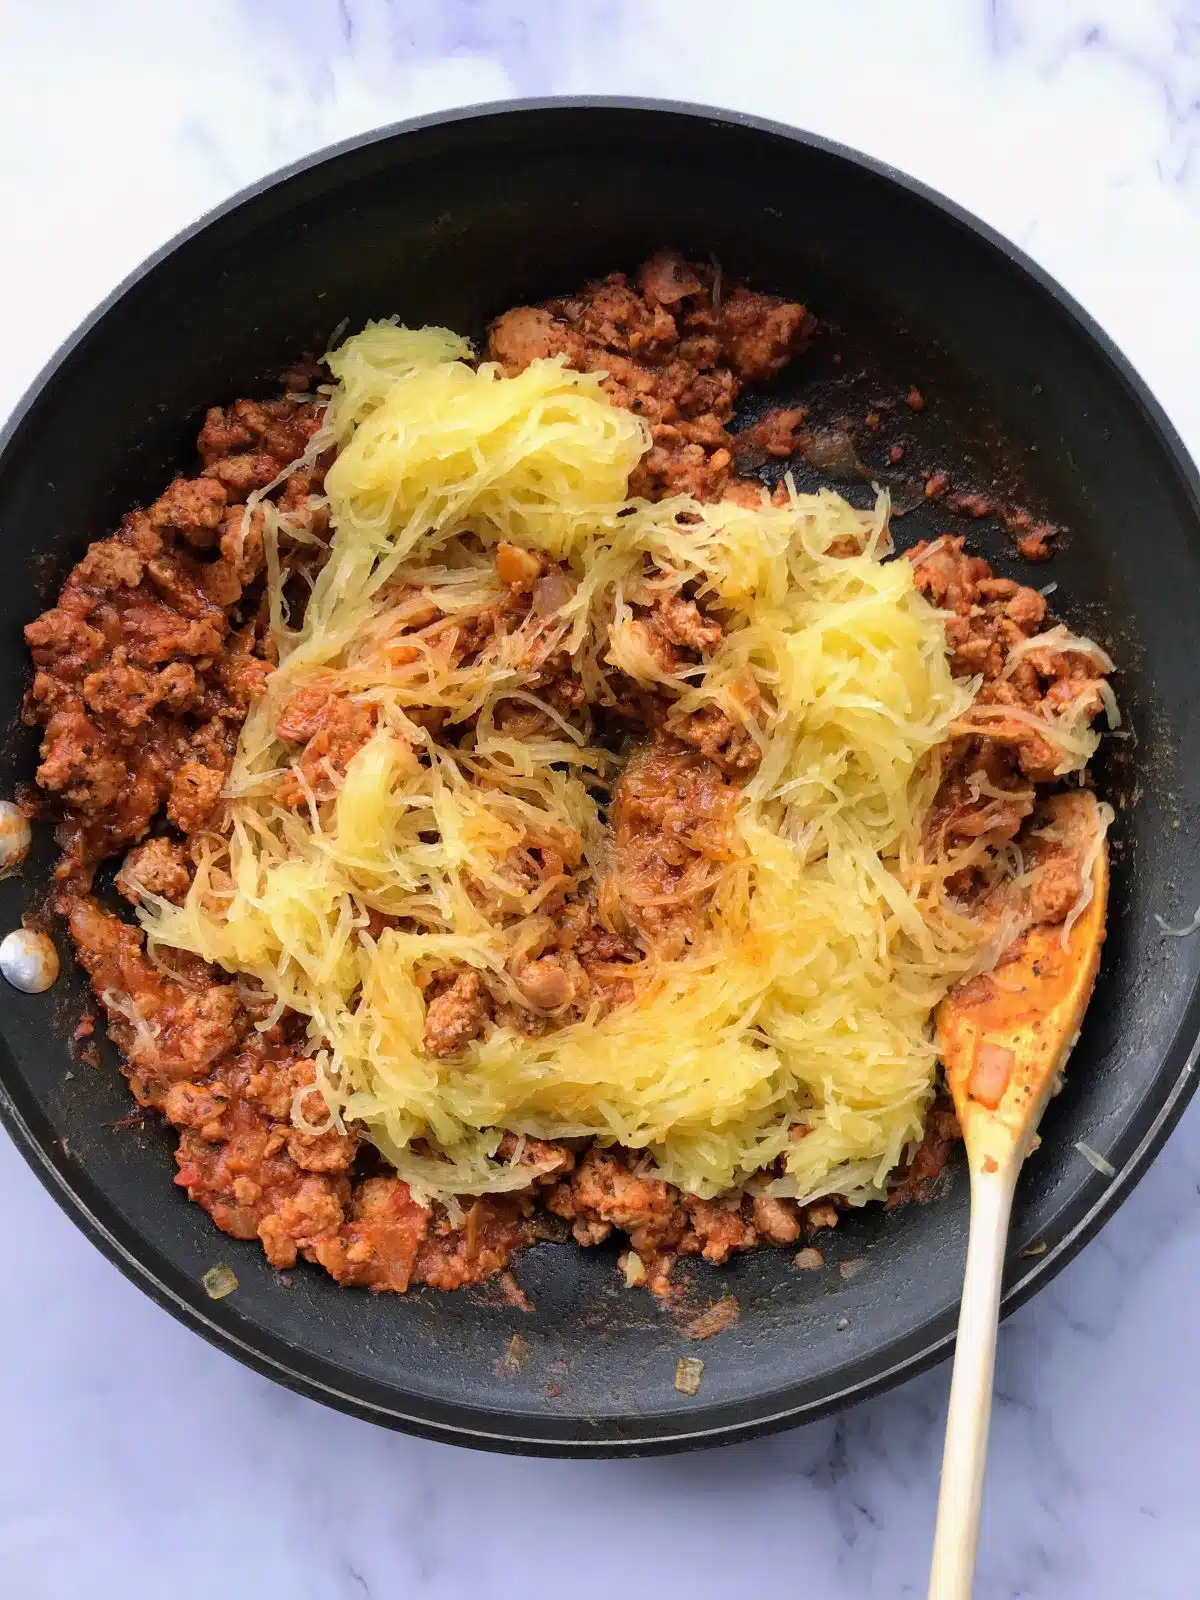 Spaghetti squash strands added to skillet with Italian sausage.